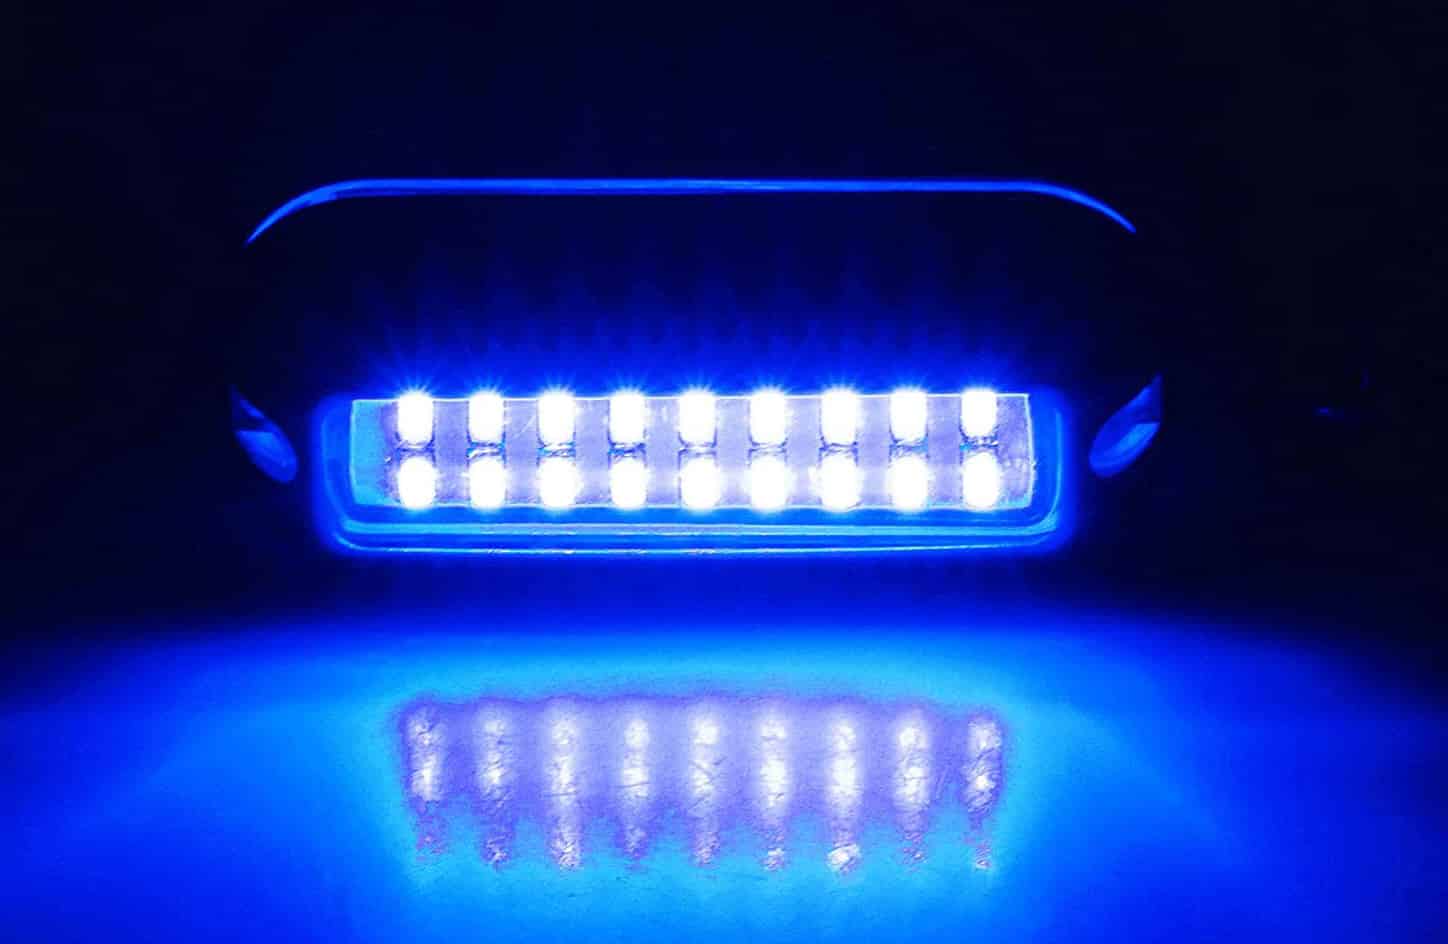 Top 10 Best Underwater LED Boat Lights in 2022 - Show Guide Me